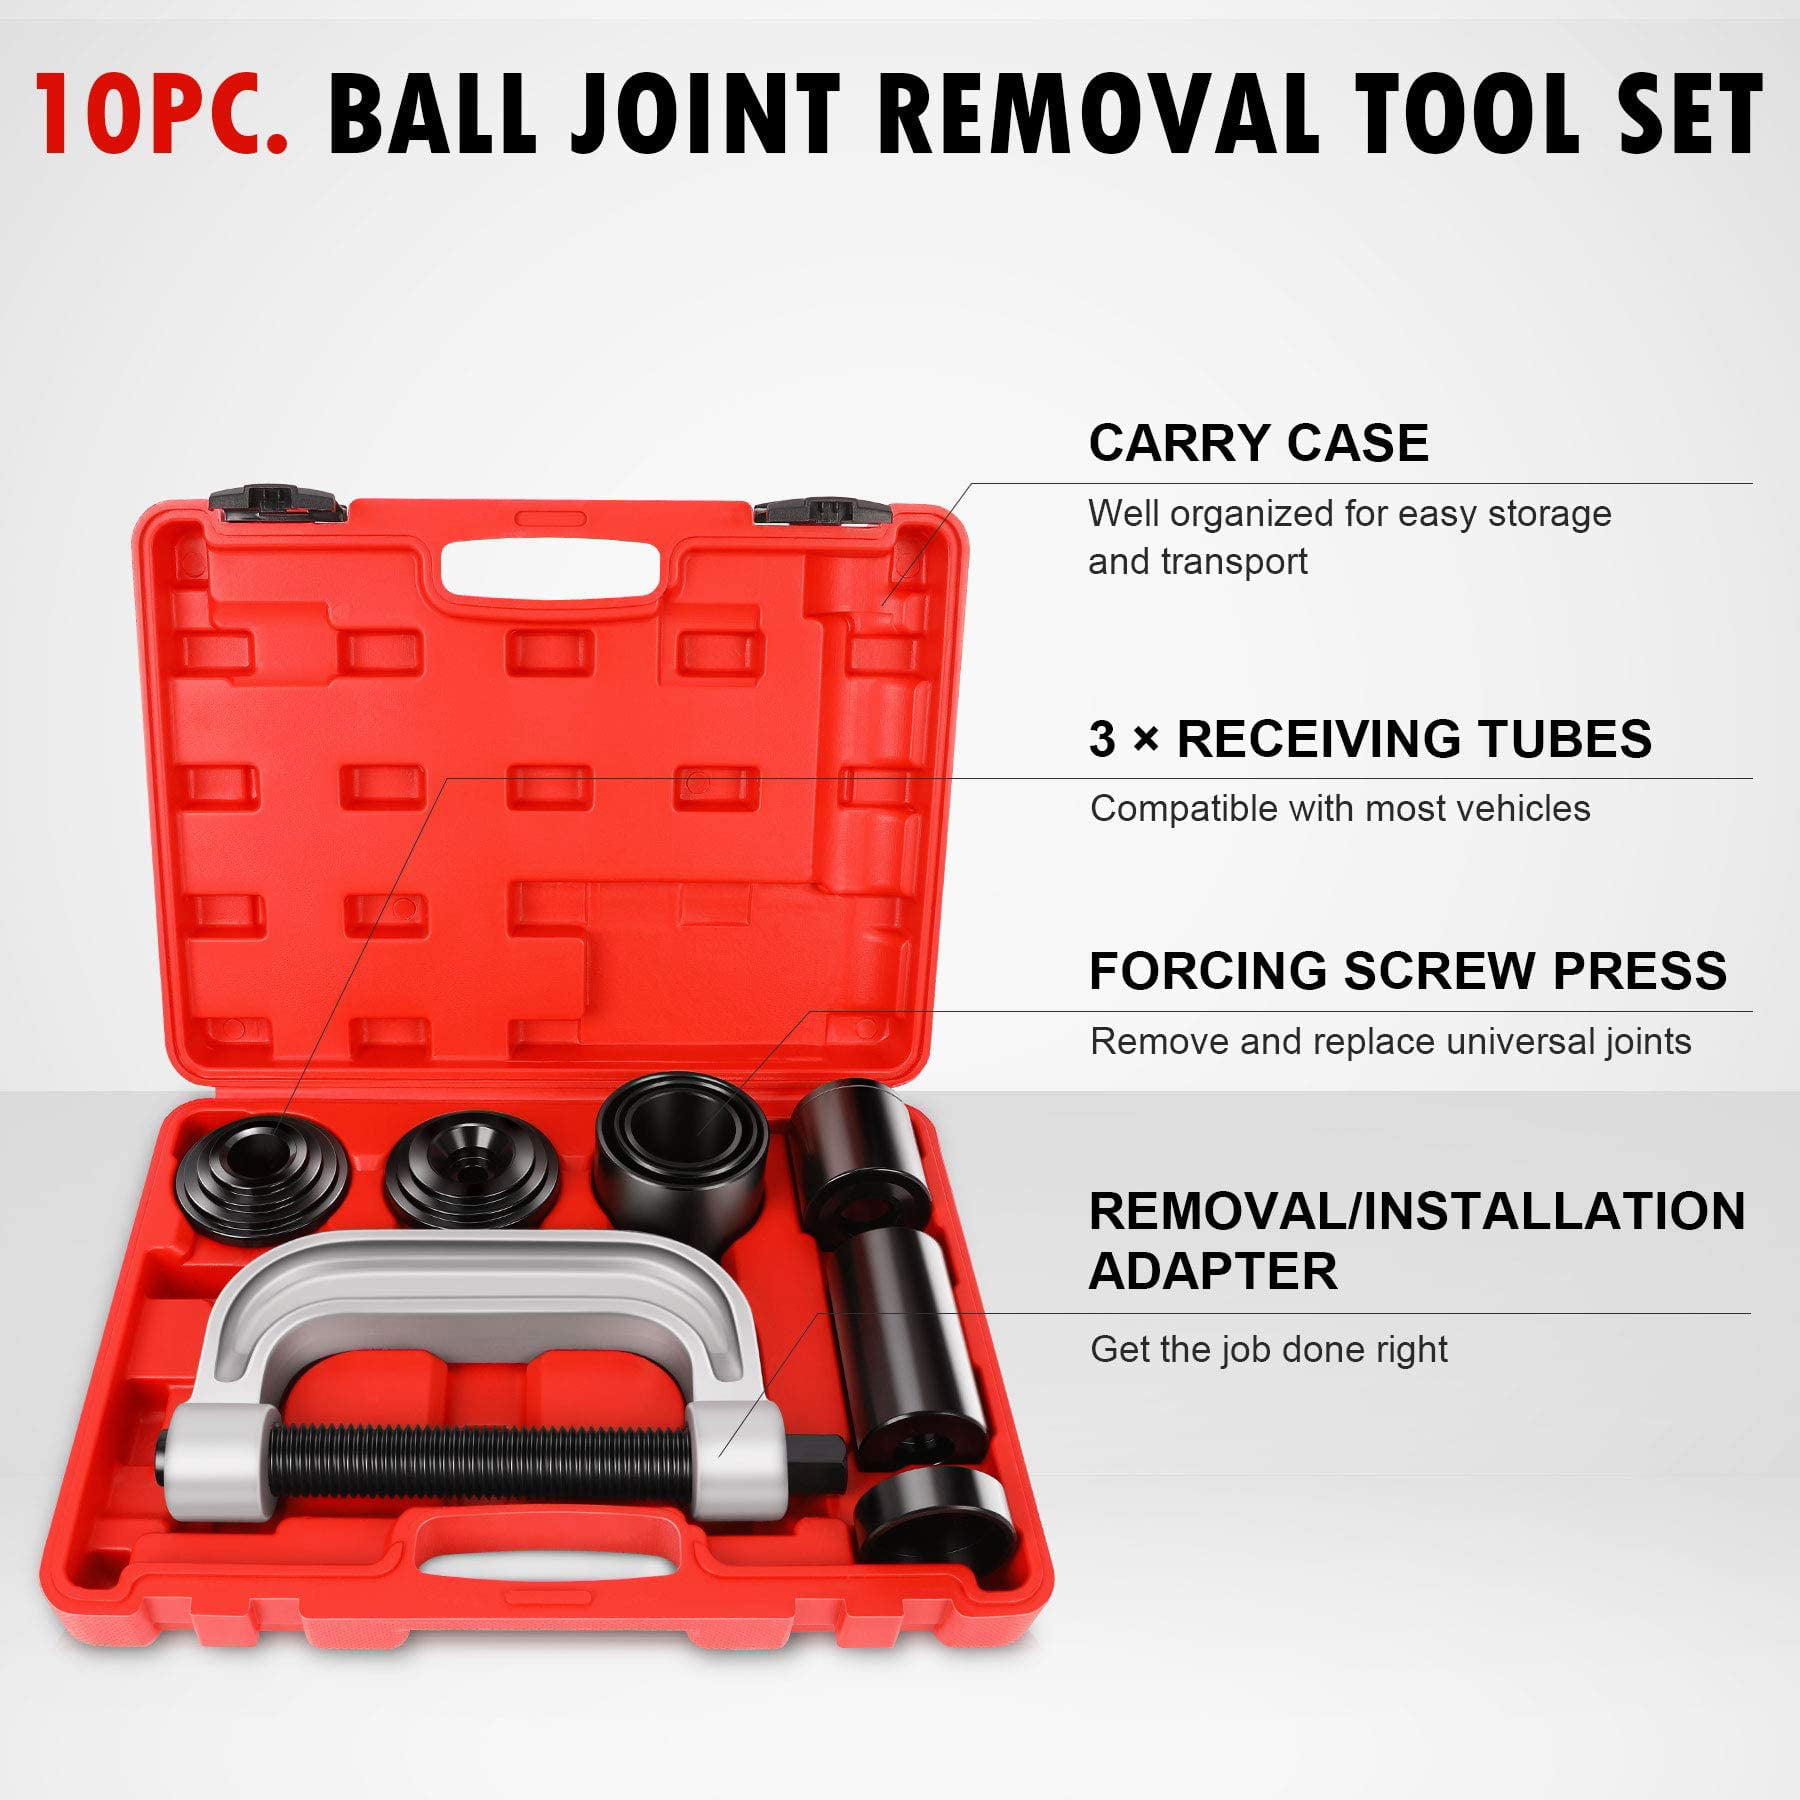 Orion Motor Tech Ball Joint Separator Tool Kit Bundle with Ball Joint Press & U-Joint Puller Service Tool Set 2 Items